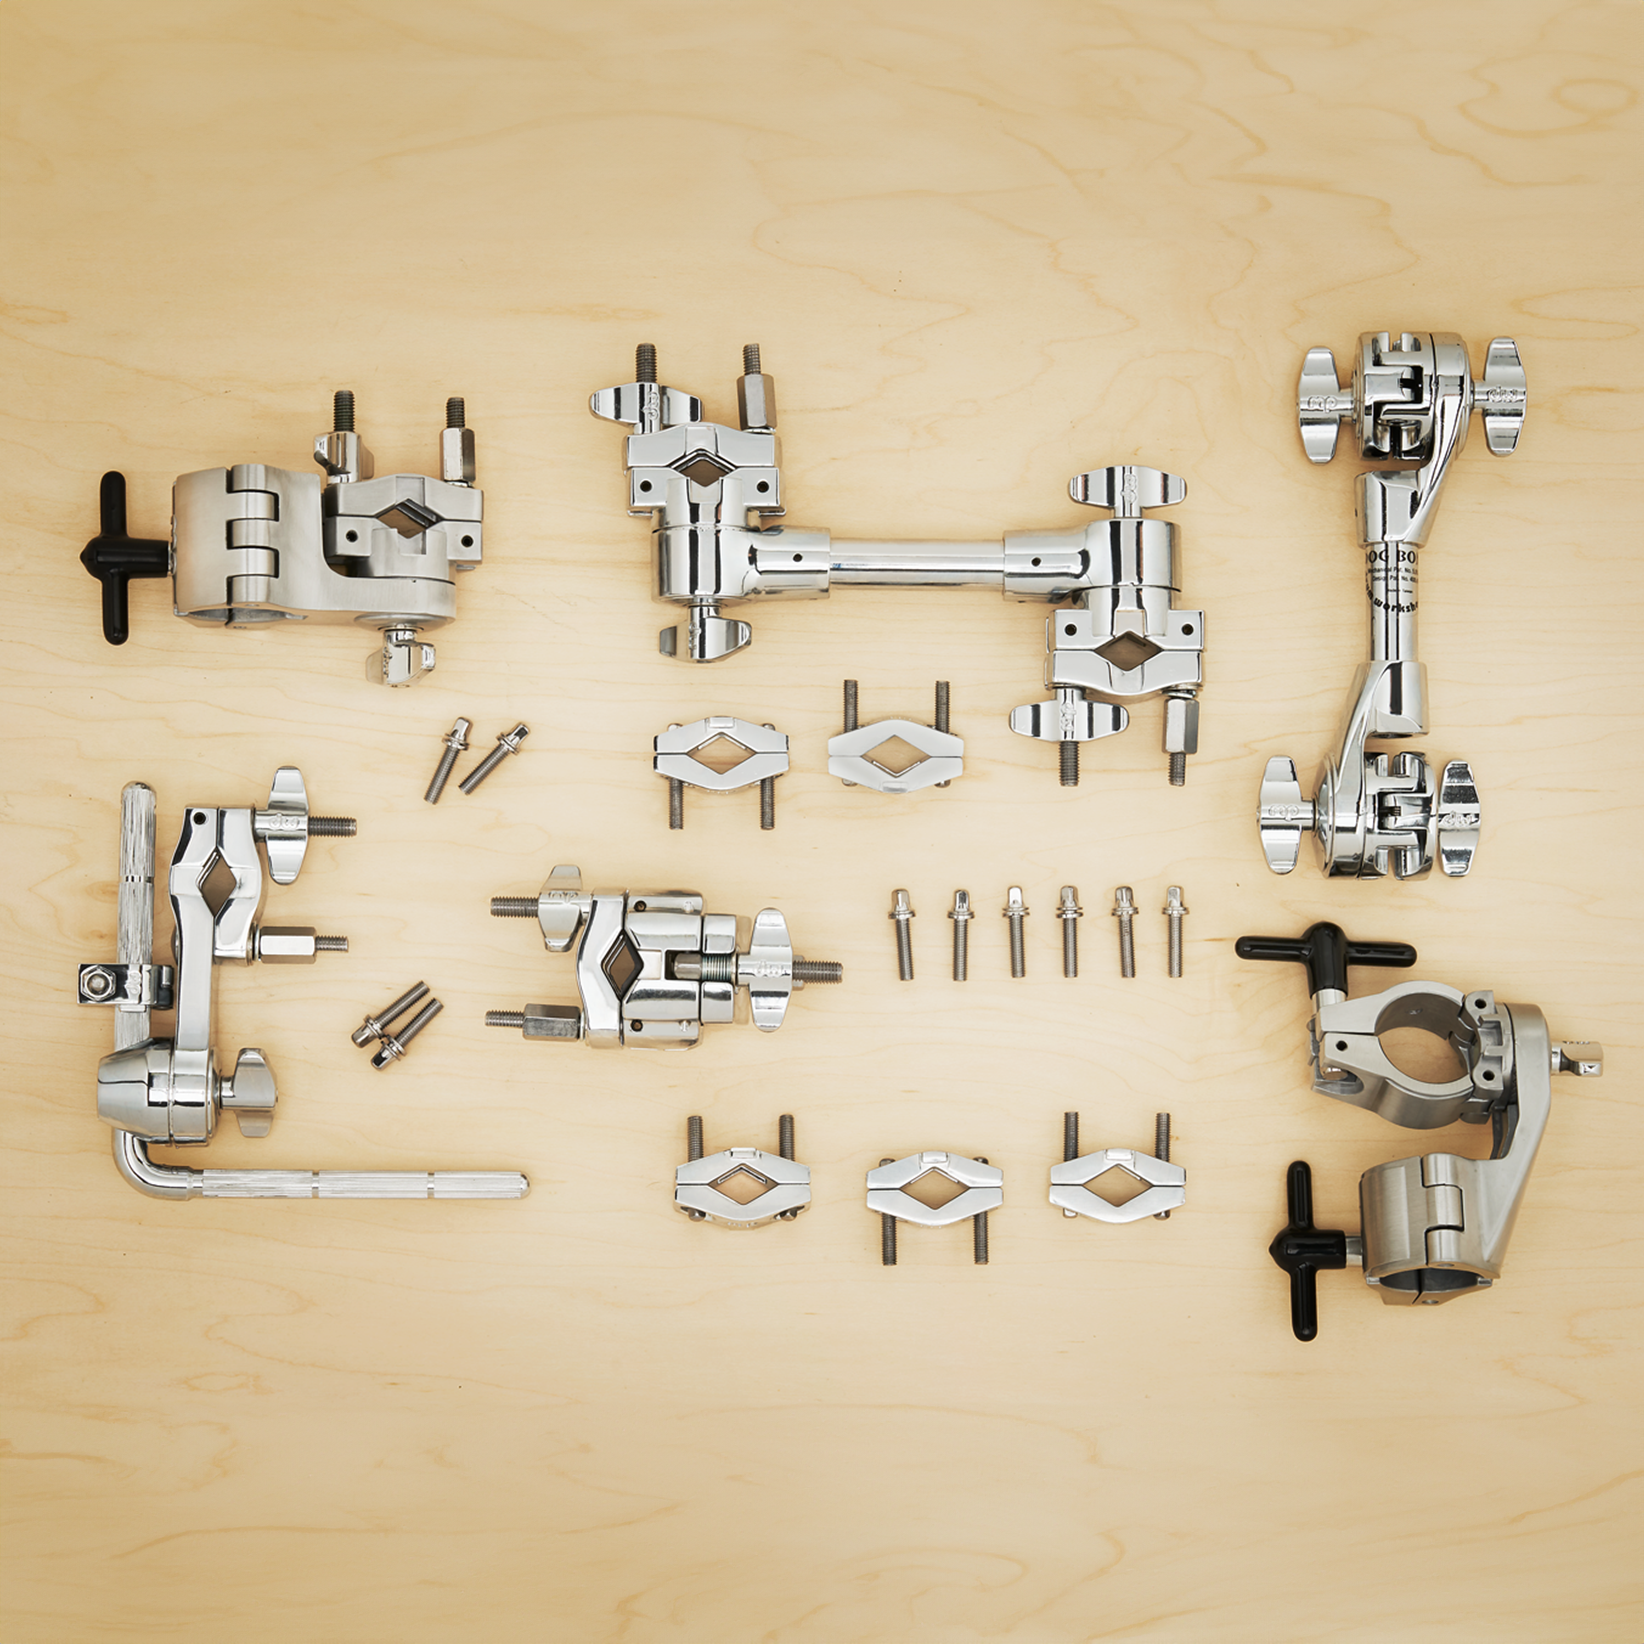 This spread of clamps includes dogbones, memory locks, accessory arms, and various replacement parts.